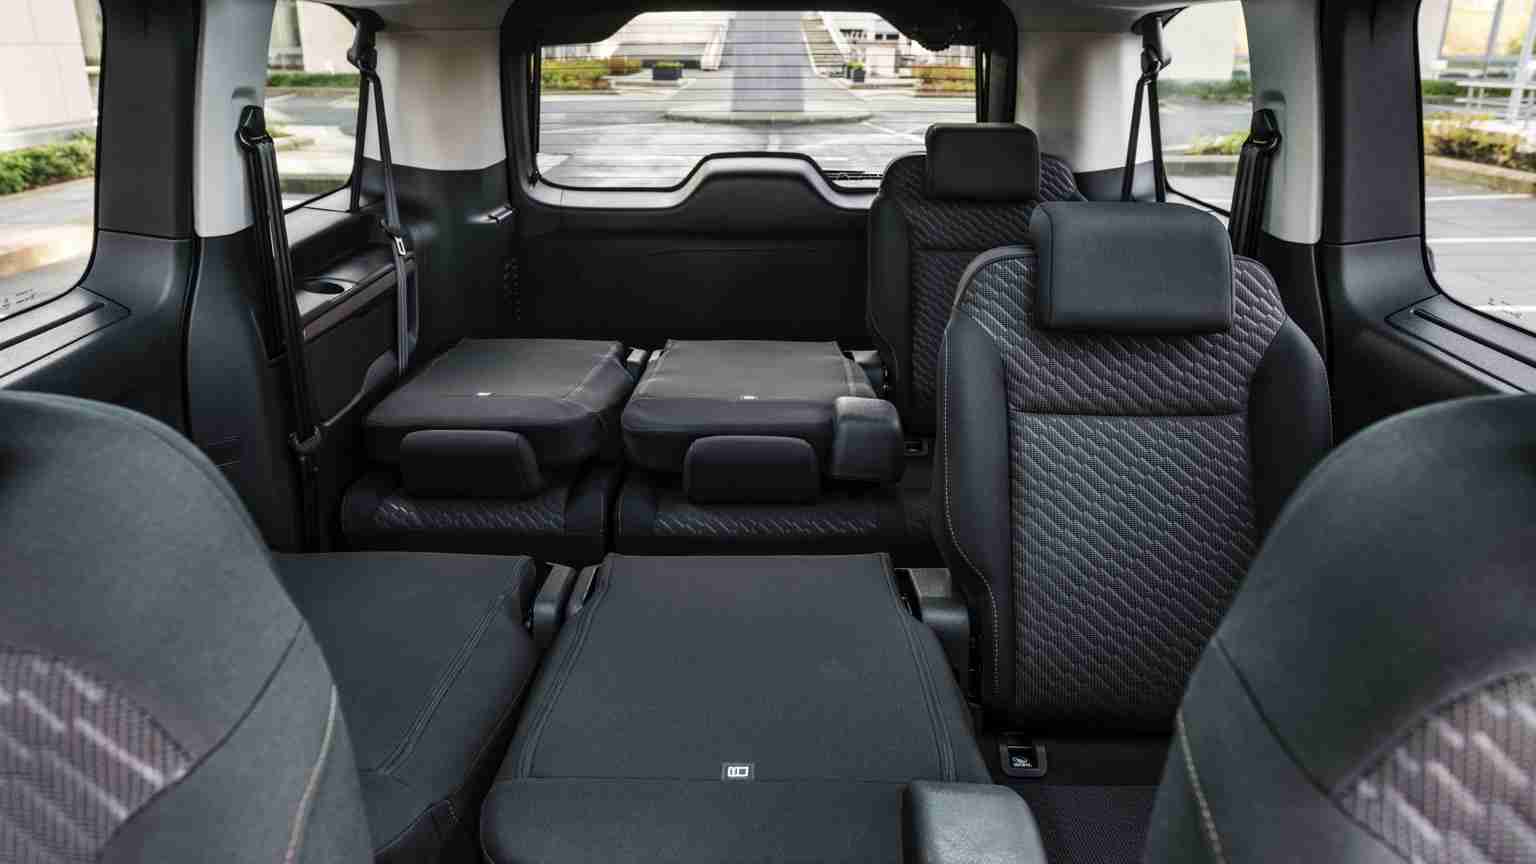 Toyota PROACE Shuttle M 75 kWh Lease Details